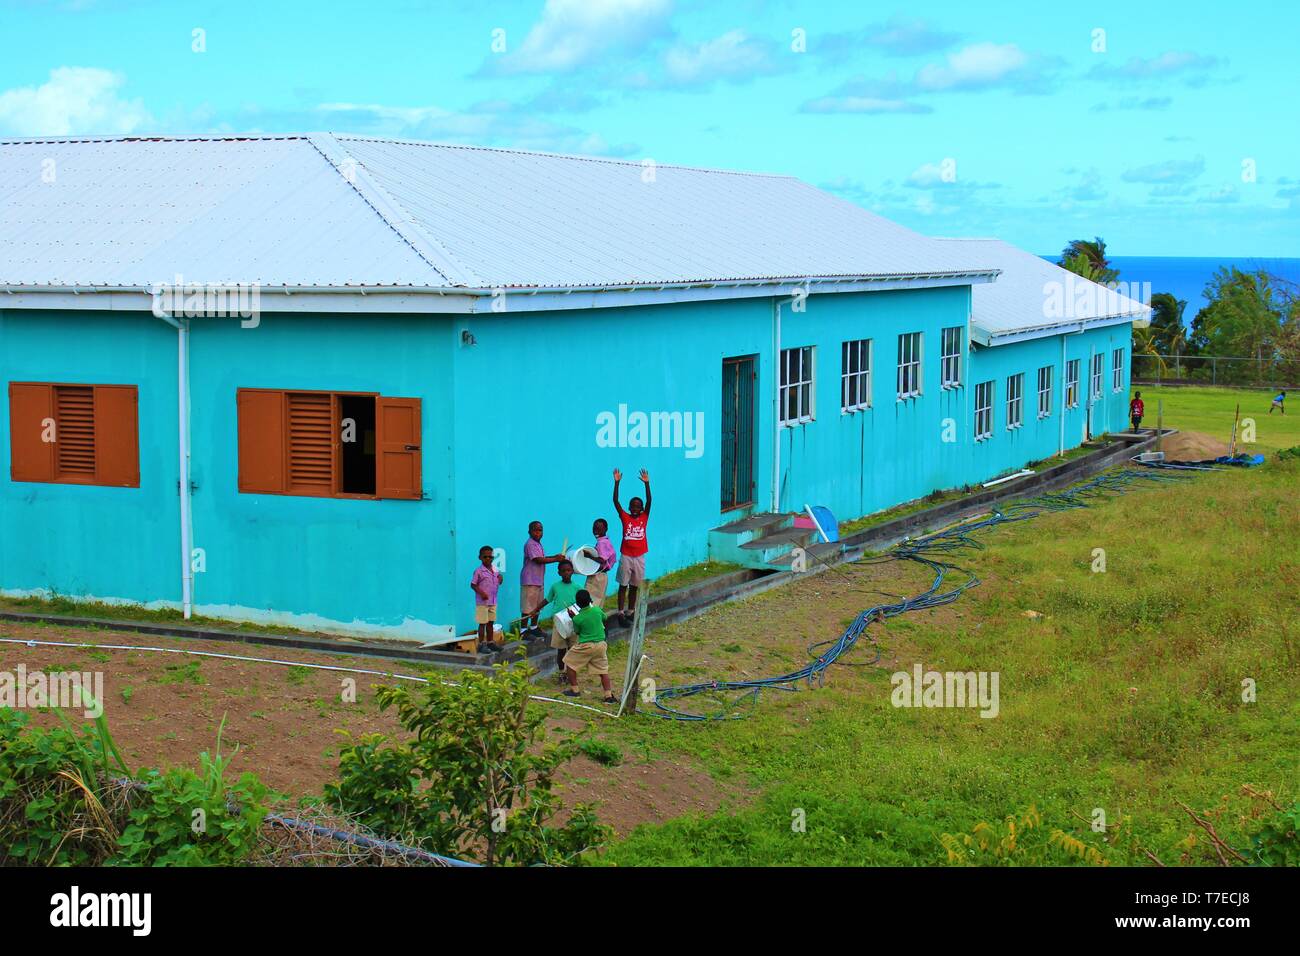 St Kitts, Caribbean - March 1st 2018: A group of children play in the grounds of a school on the Caribbean island of St Kitts. Stock Photo